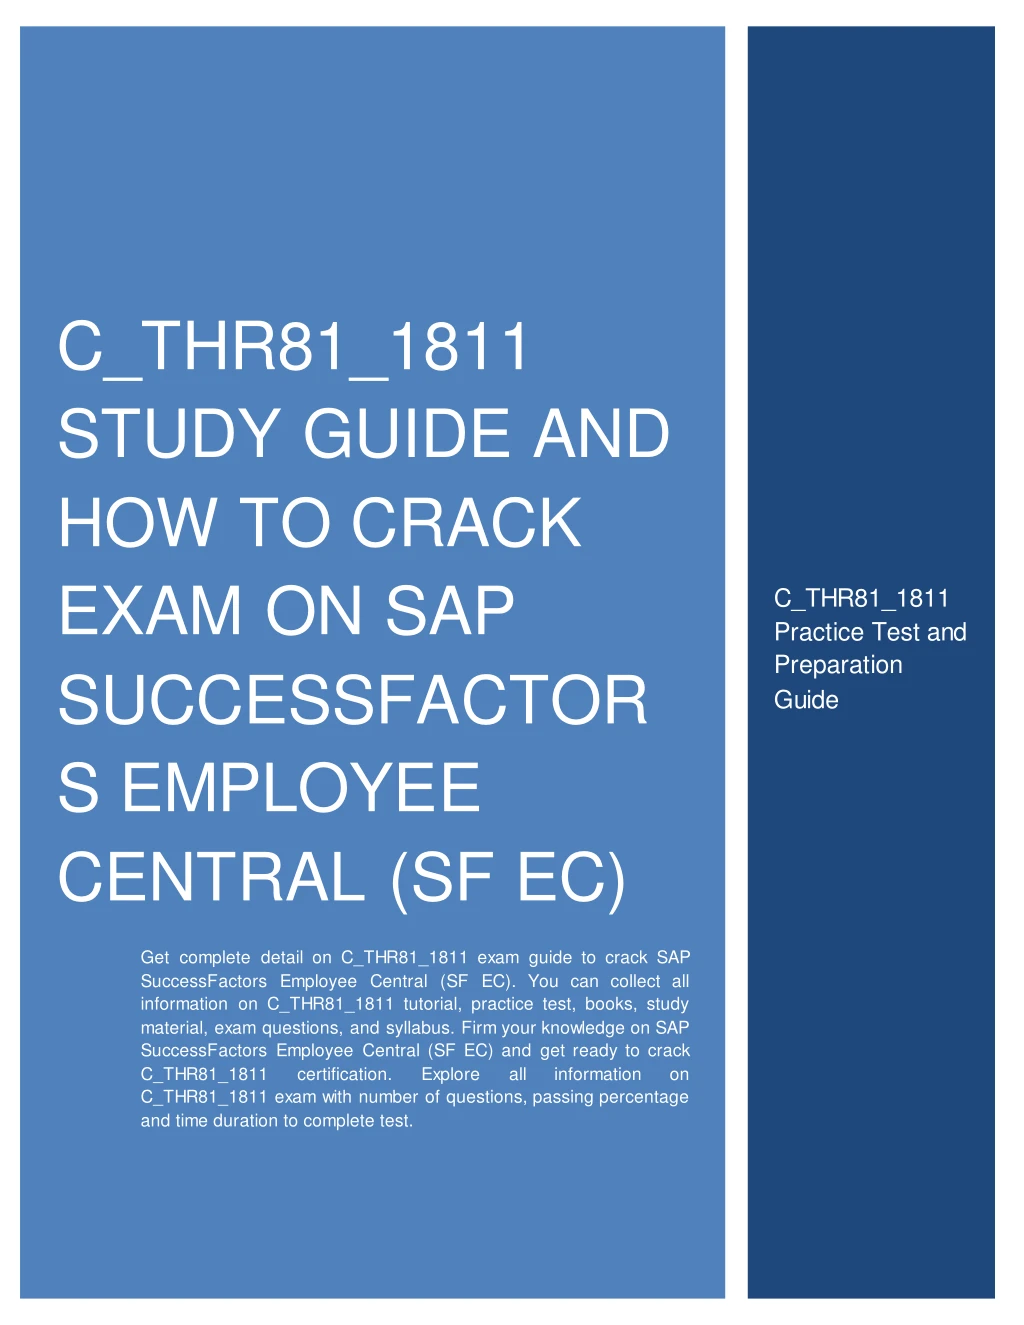 c thr81 1811 study guide and how to crack exam